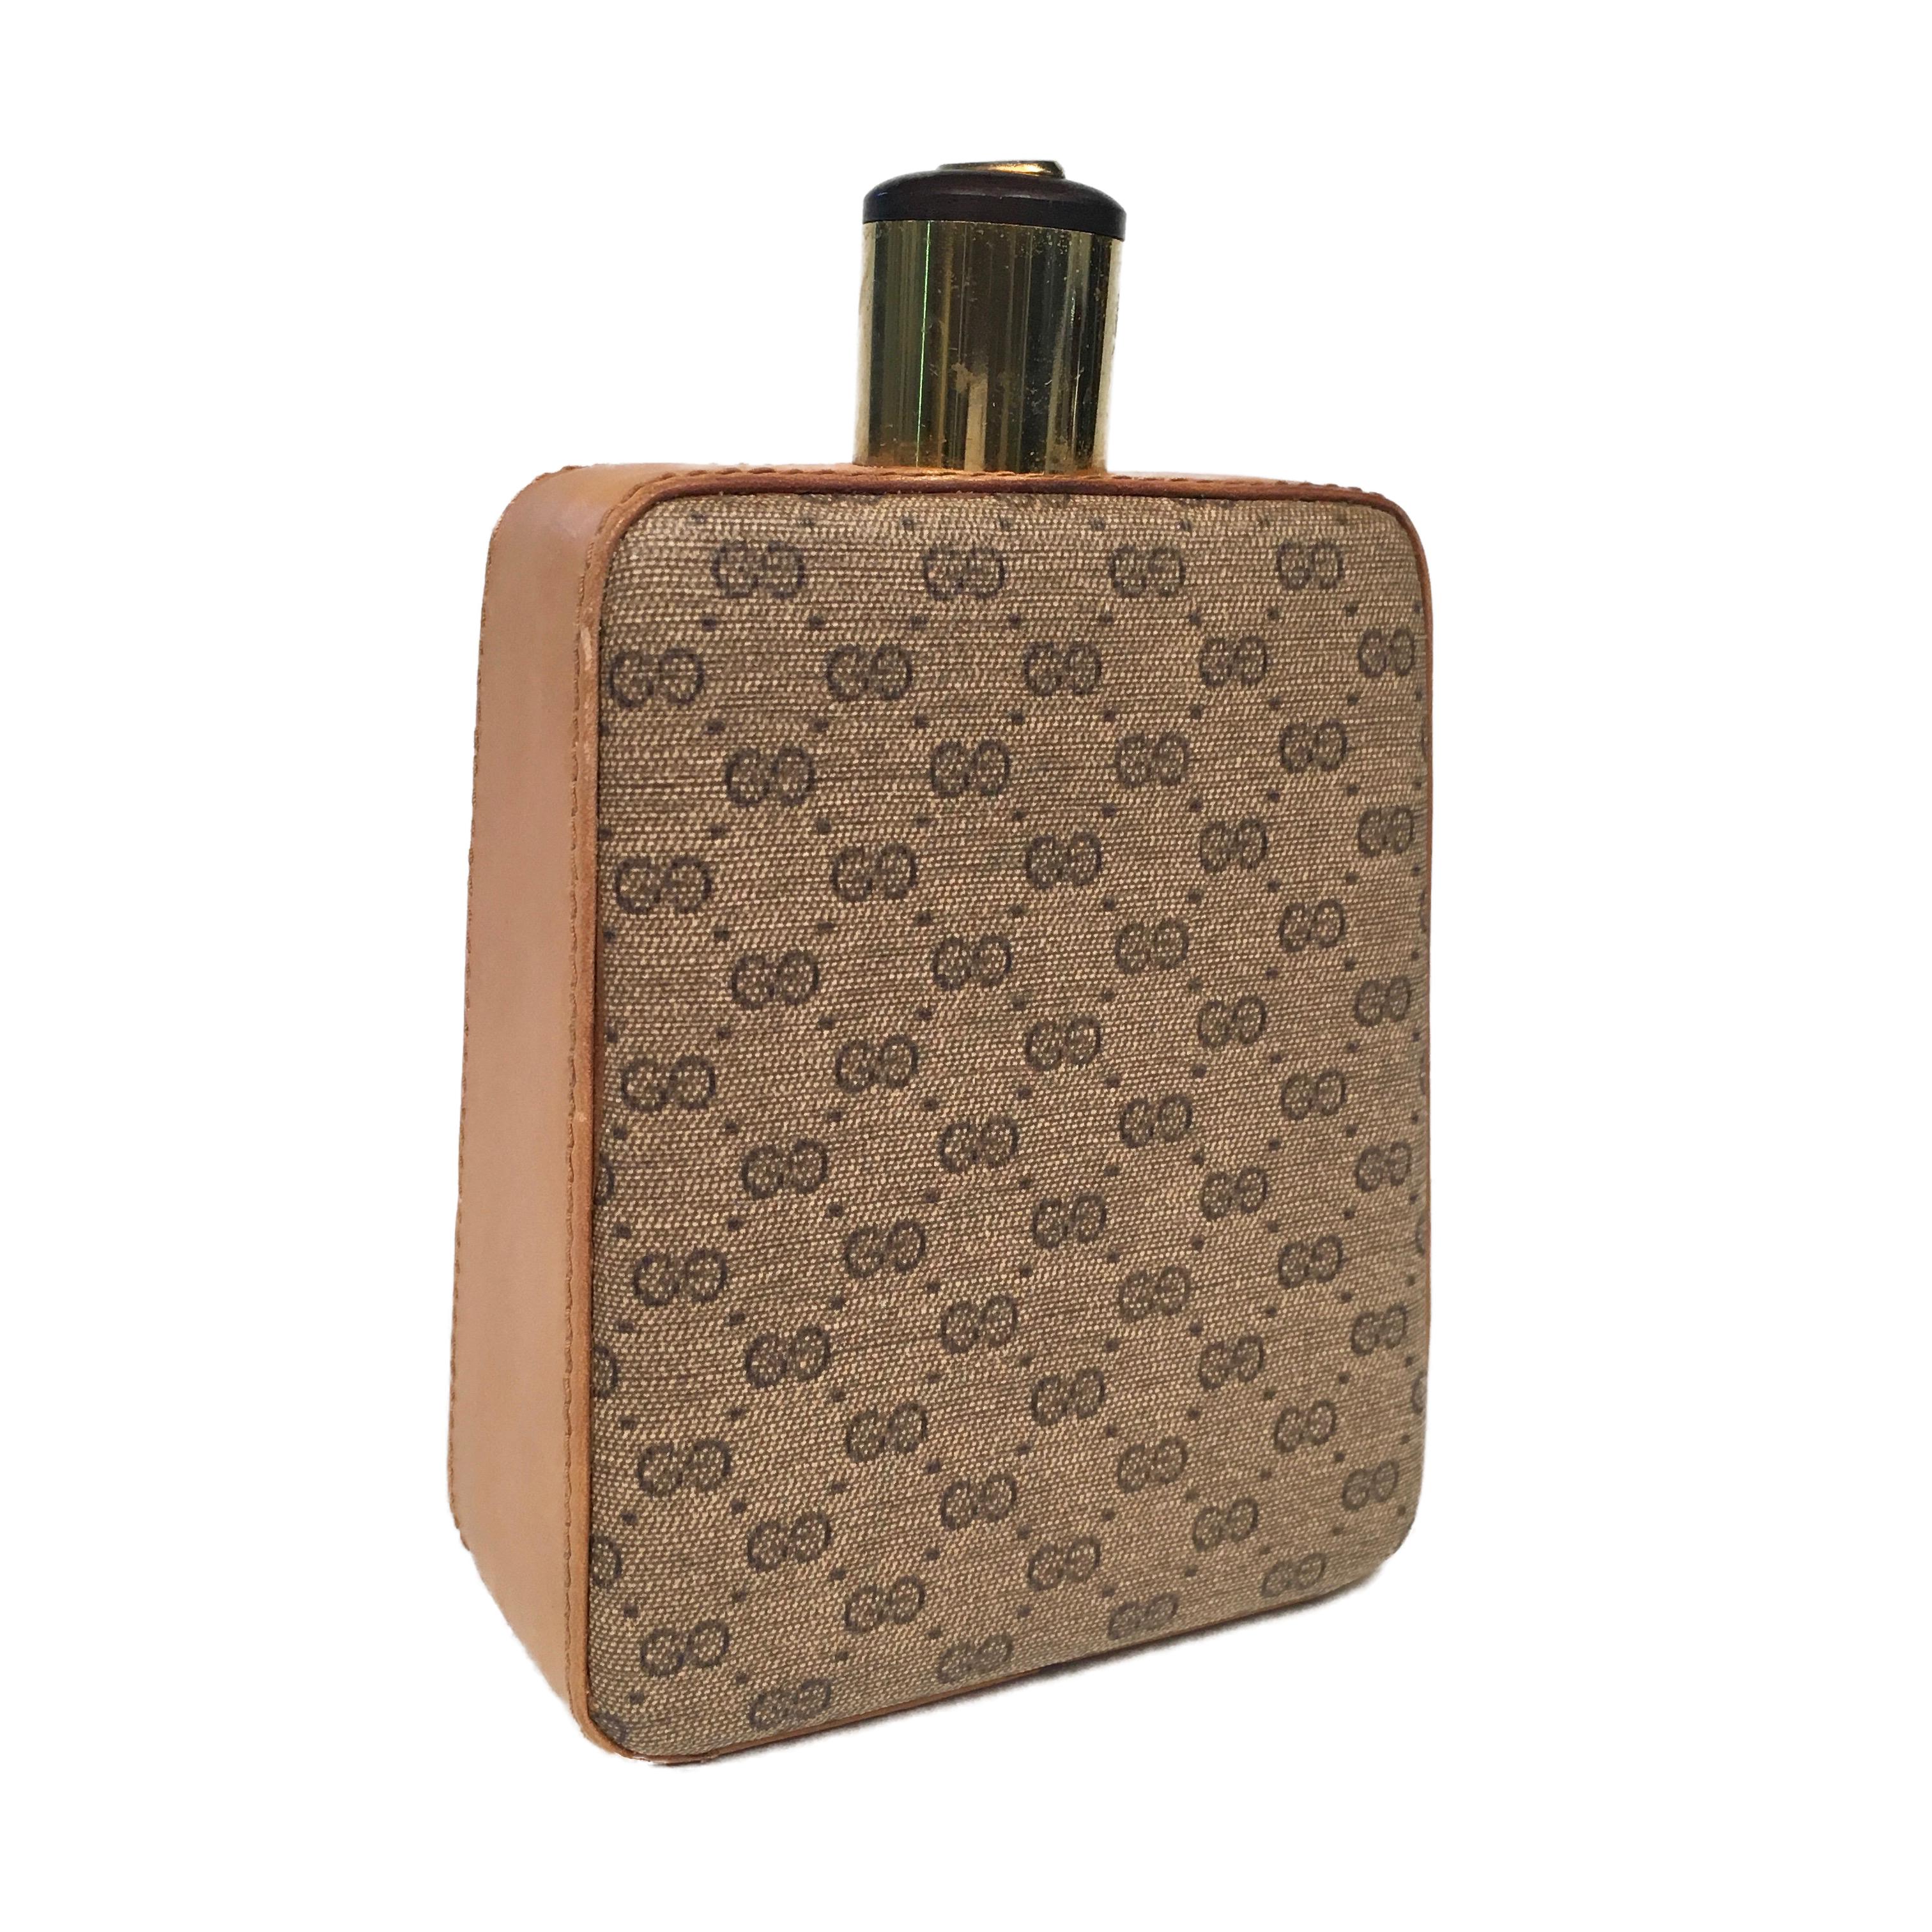 This ultra rare flask was made by Gucci, most likely in the early 1970s. Made from brown leather, it features Gucci's iconic webbing embroidered.
Stamped Gucci MADE IN ITALY.